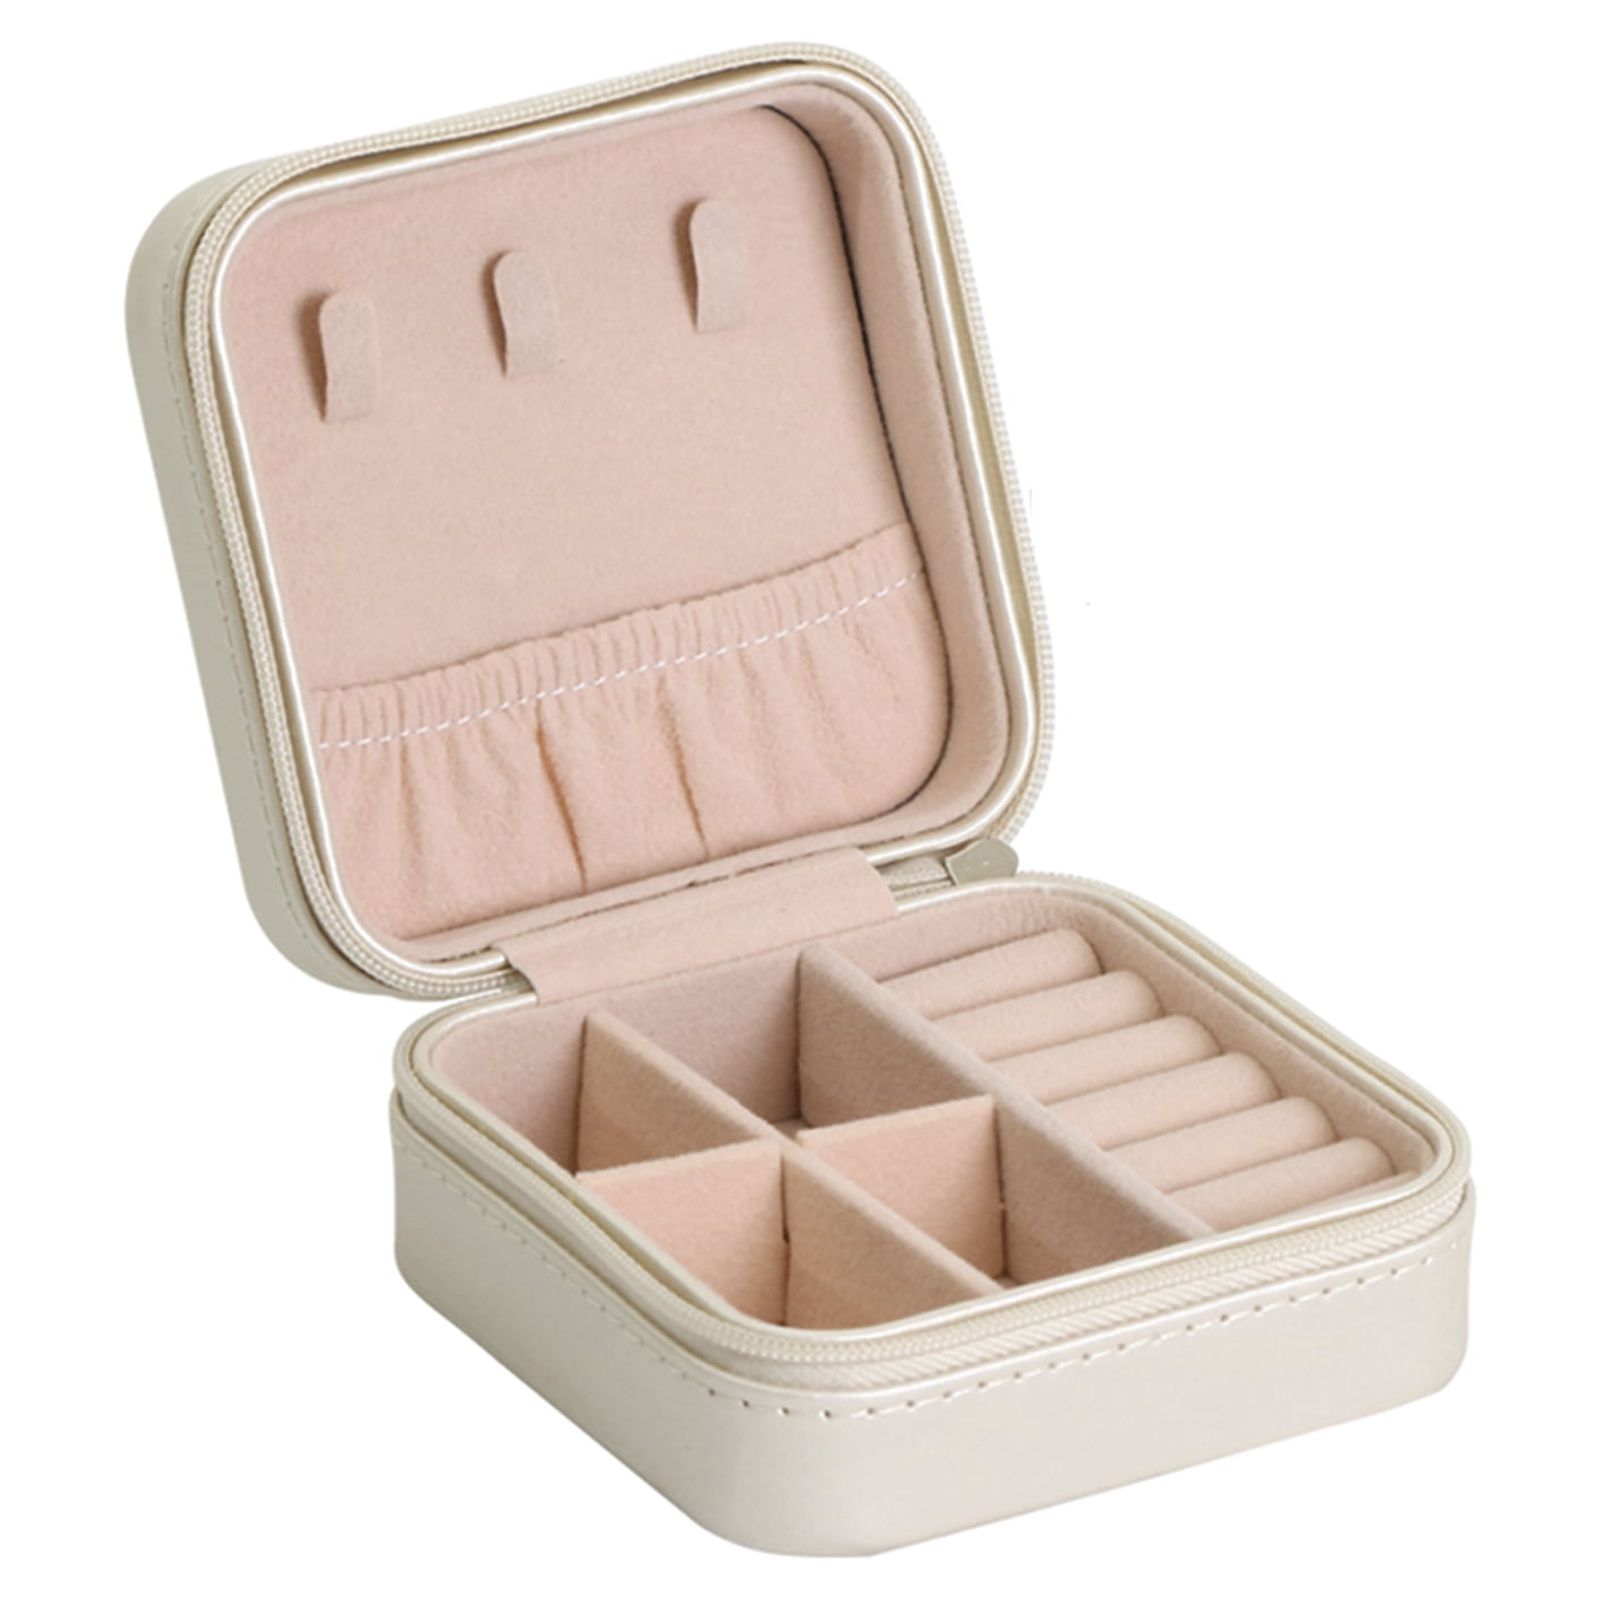 Small Portable Travel Jewelry Box Organizer Storage Case for Rings Earrings Necklaces - image 1 of 7